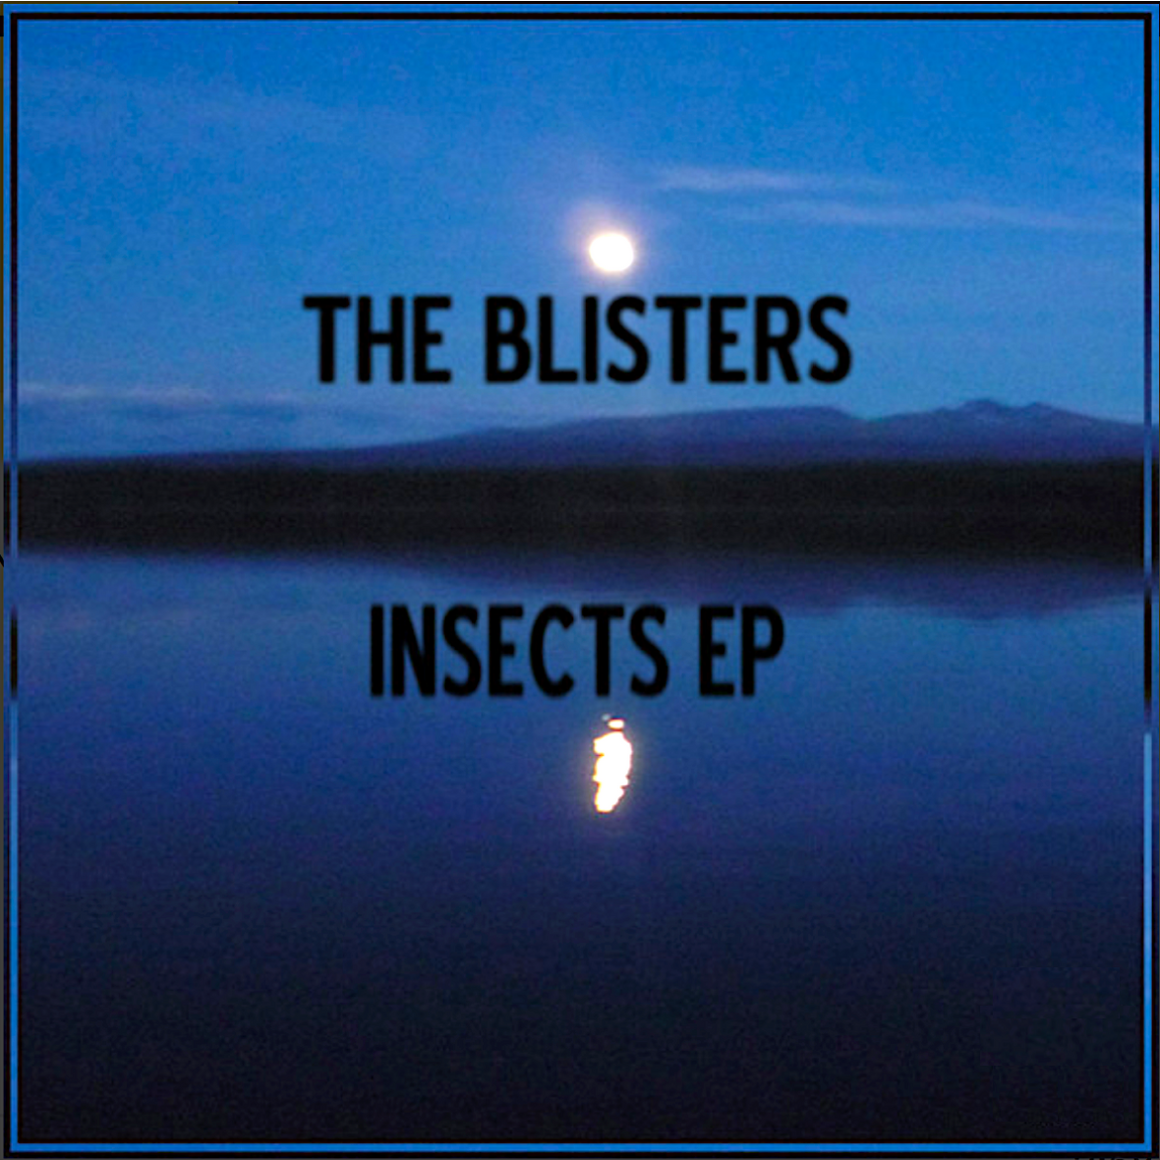 Insects EP